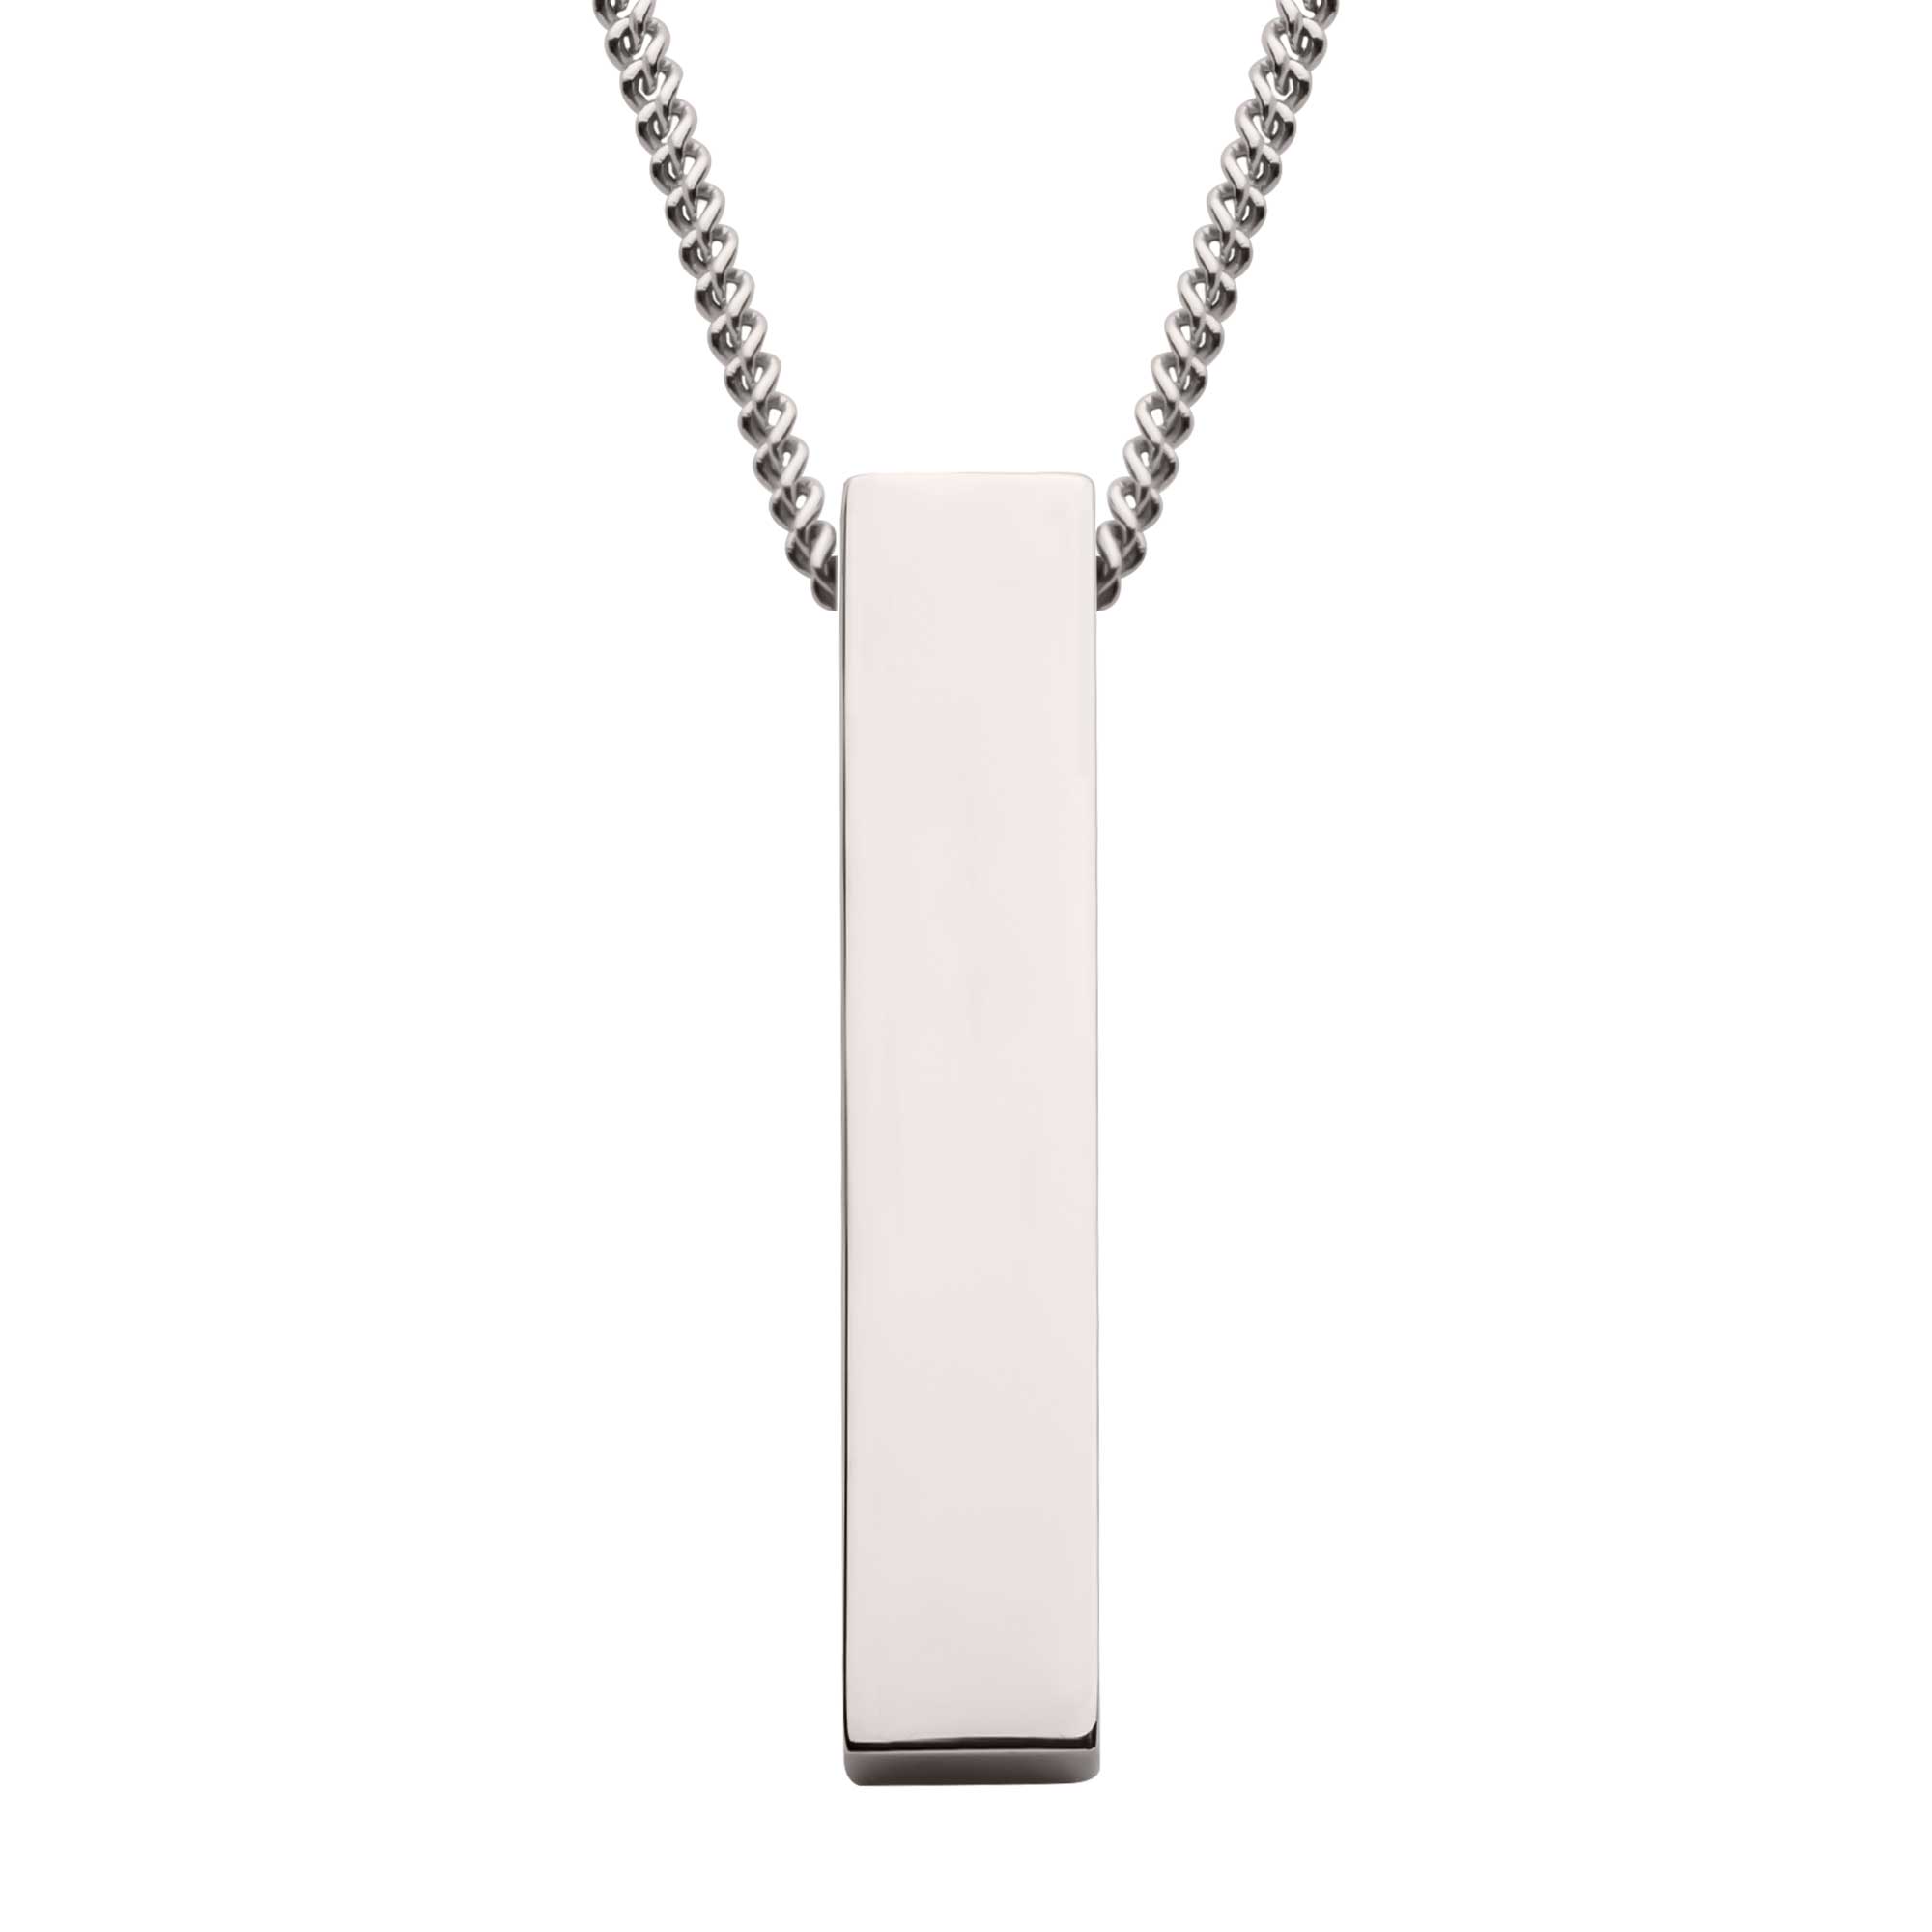 The Monolith Engravable Pendant with Chain Jayson Jewelers Cape Girardeau, MO